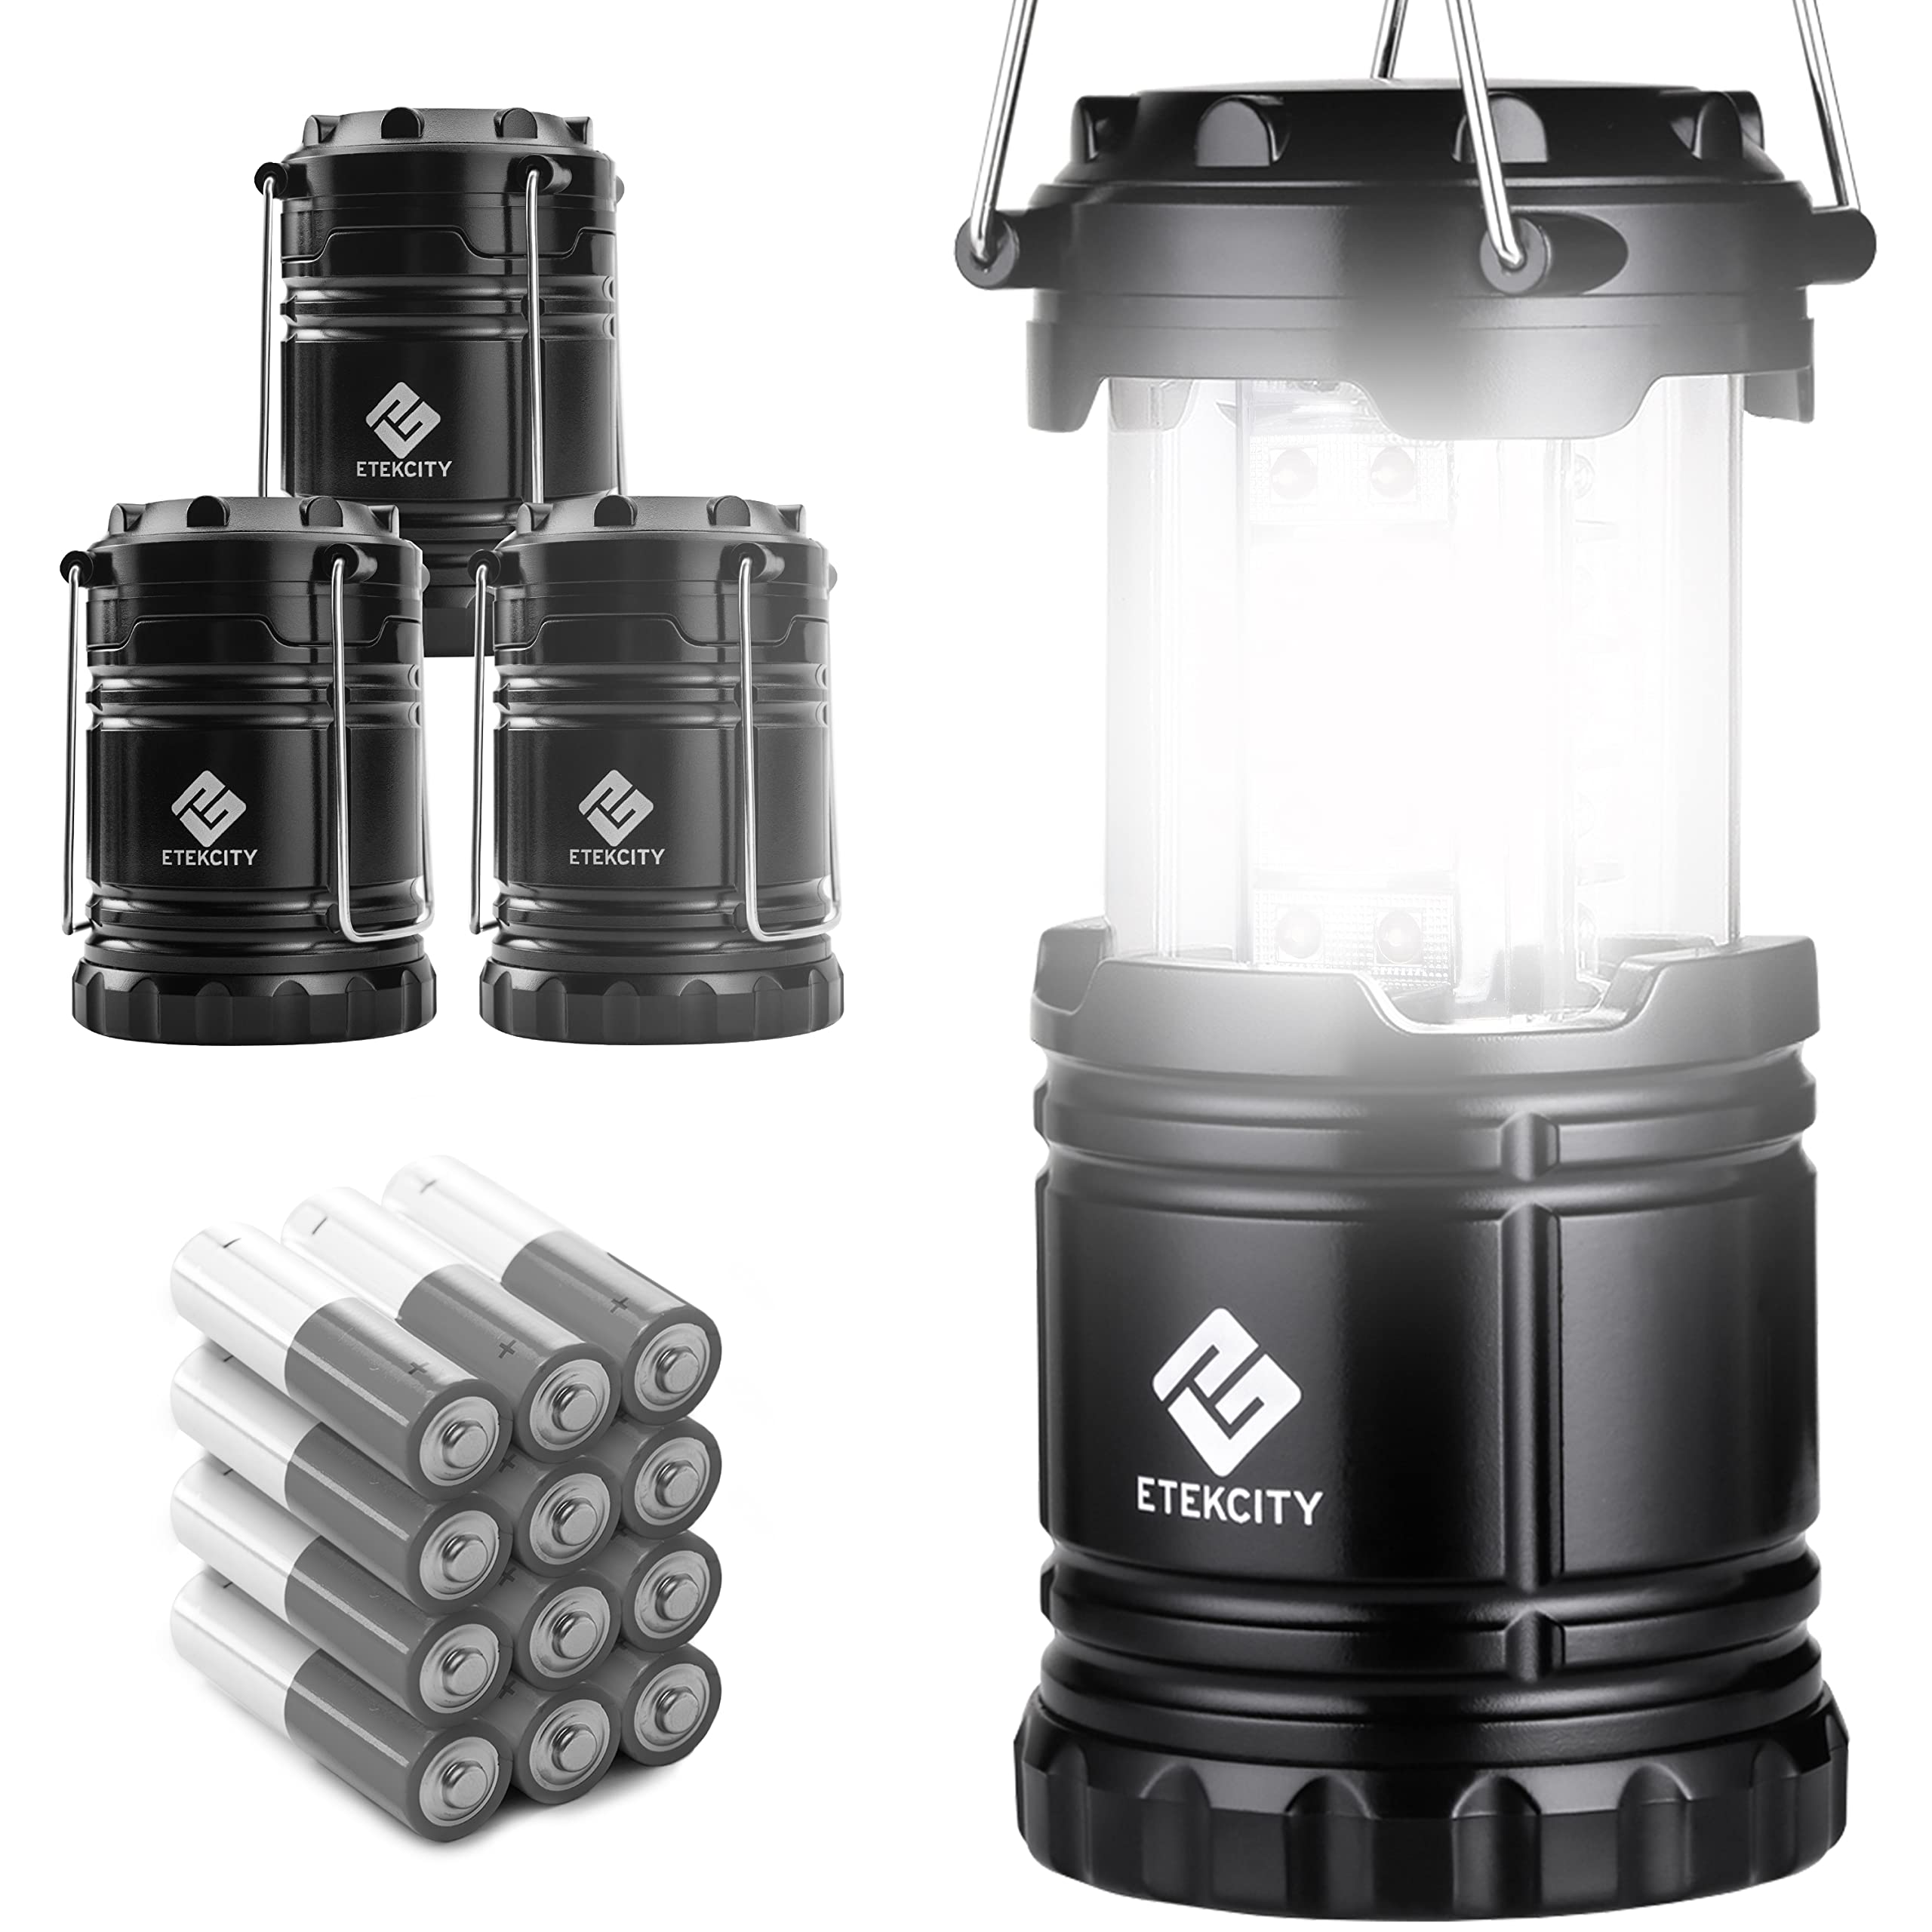 Book Cover Etekcity 4 Pack LED Camping Lantern Portable Flashlight with 12 AA Batteries - Survival Kit for Emergency, Hurricane, Power Outage (Black, Collapsible) (CL10)